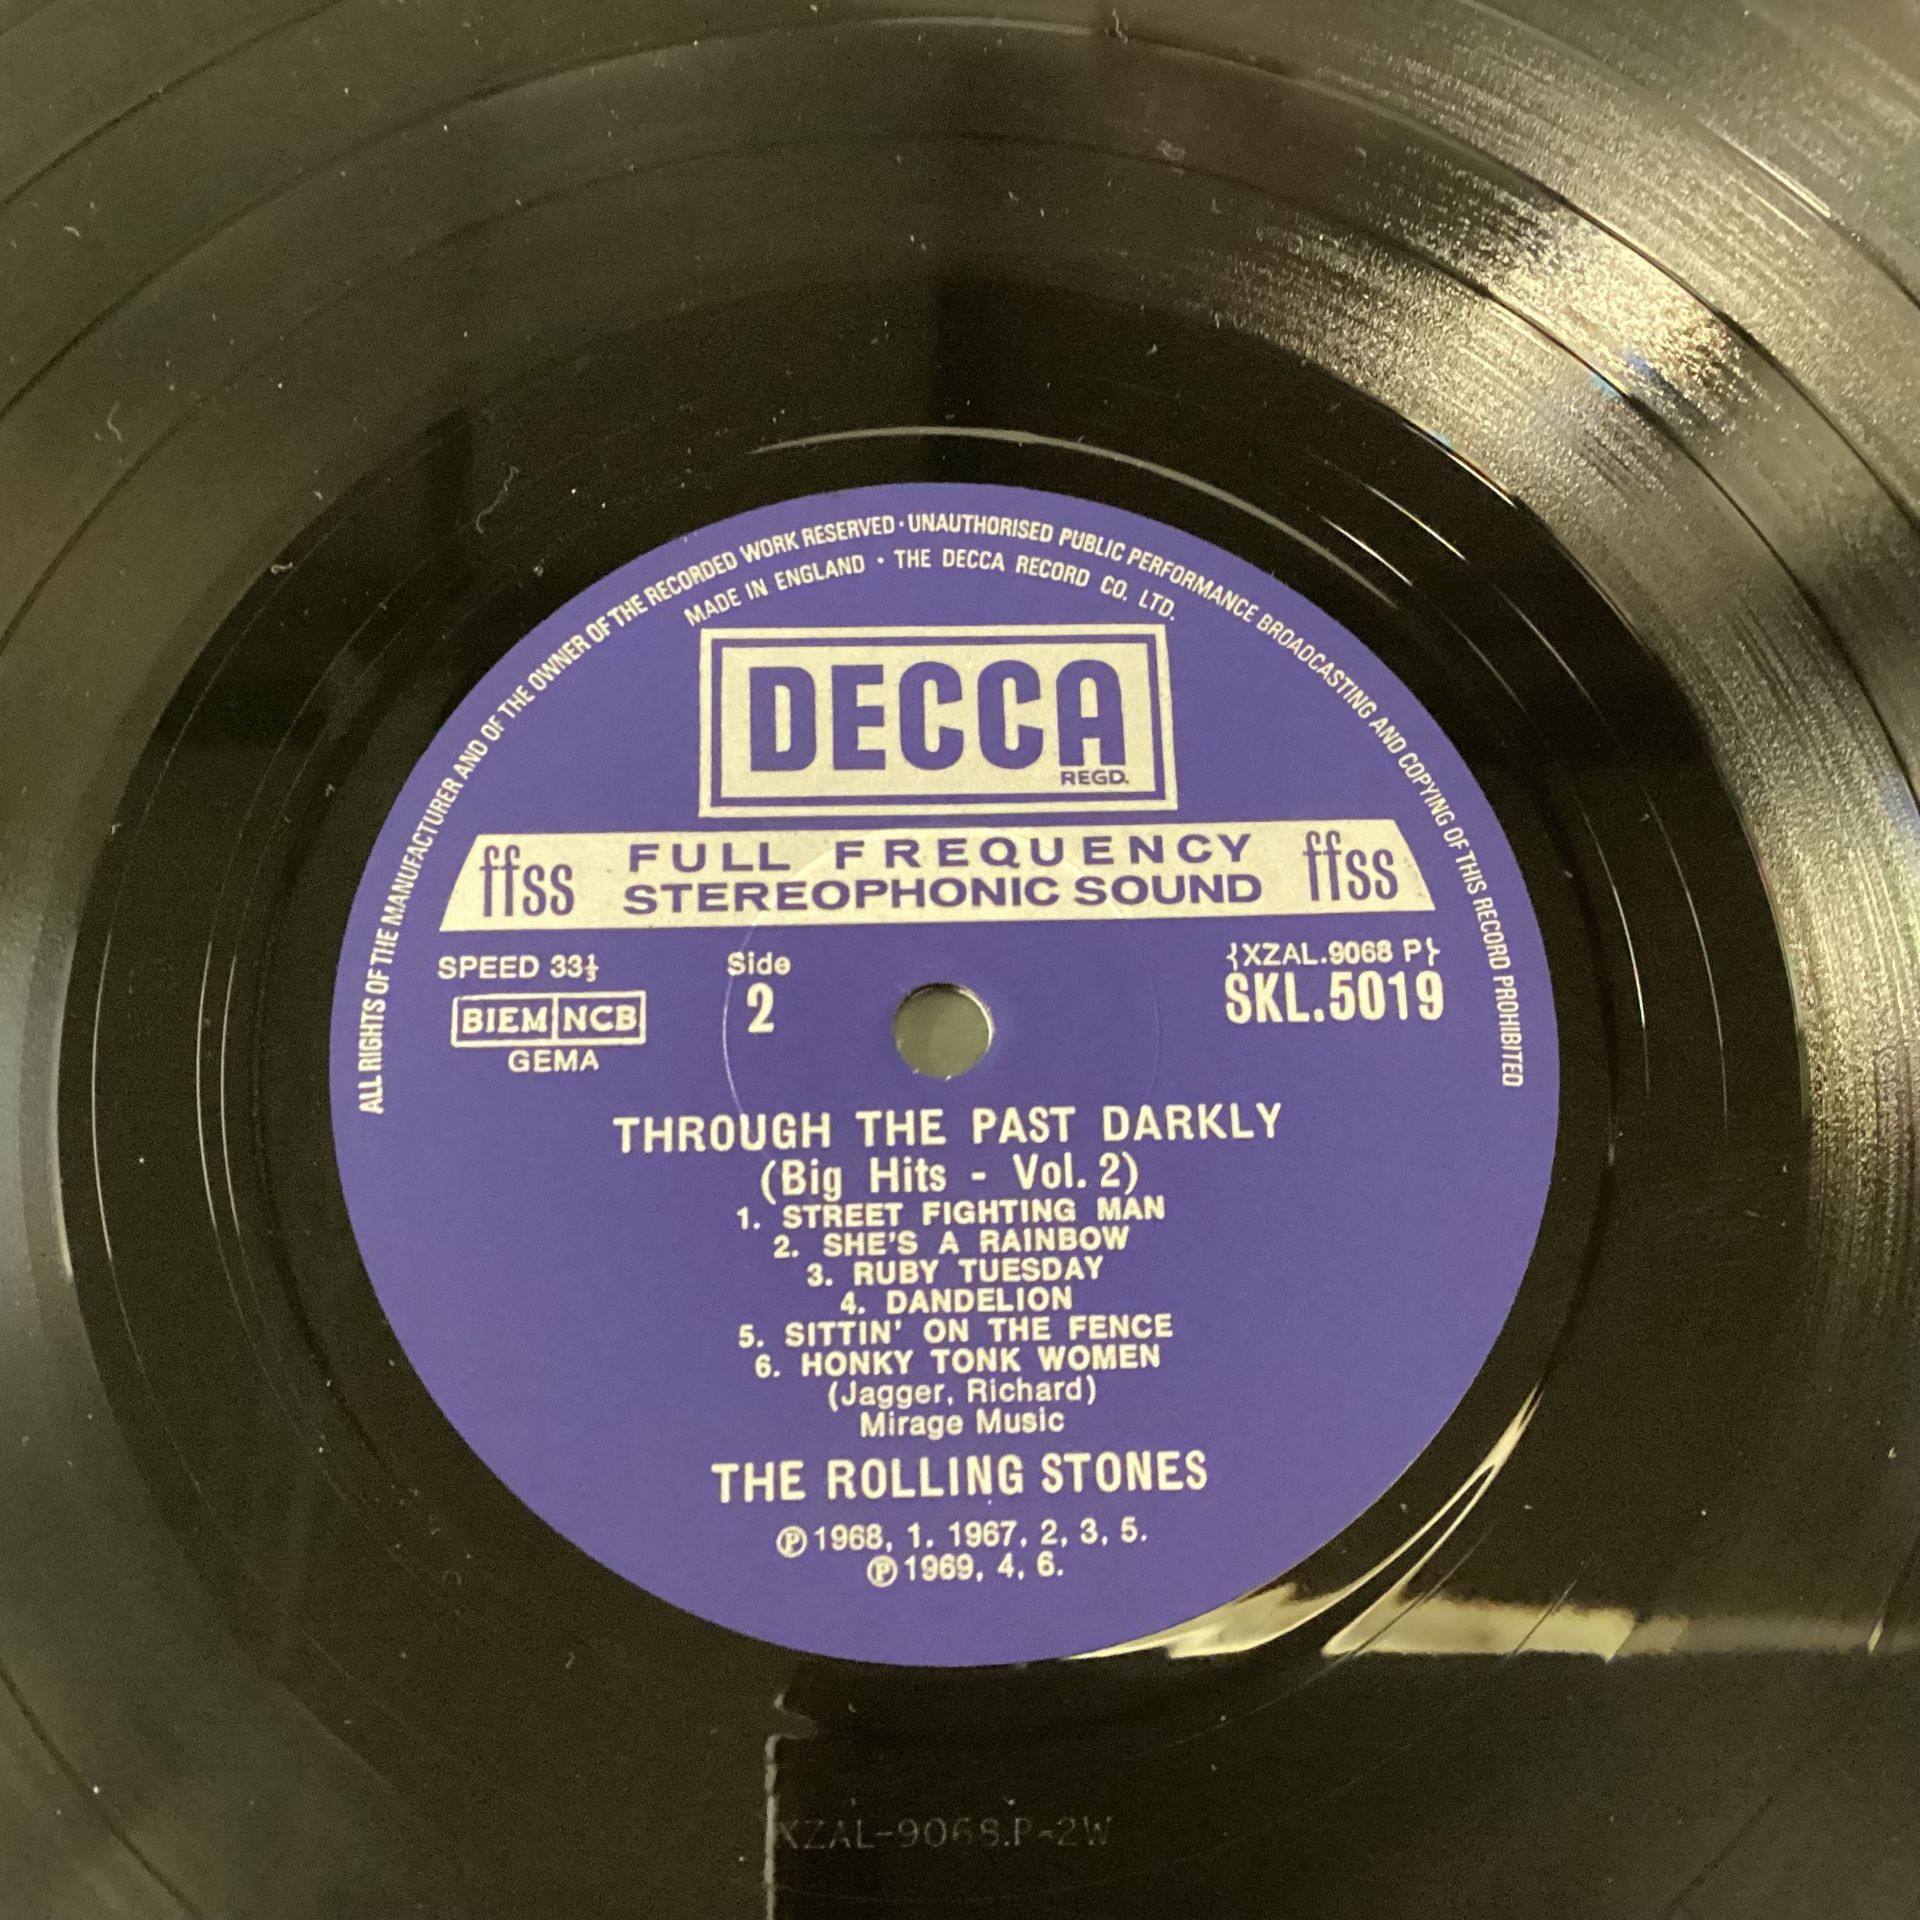 THE ROLLING STONES LP ‘THROUGH THE PAST DARKLY’. An Ex copy of this Stereo album on Decca SKL 5019 - Image 4 of 4